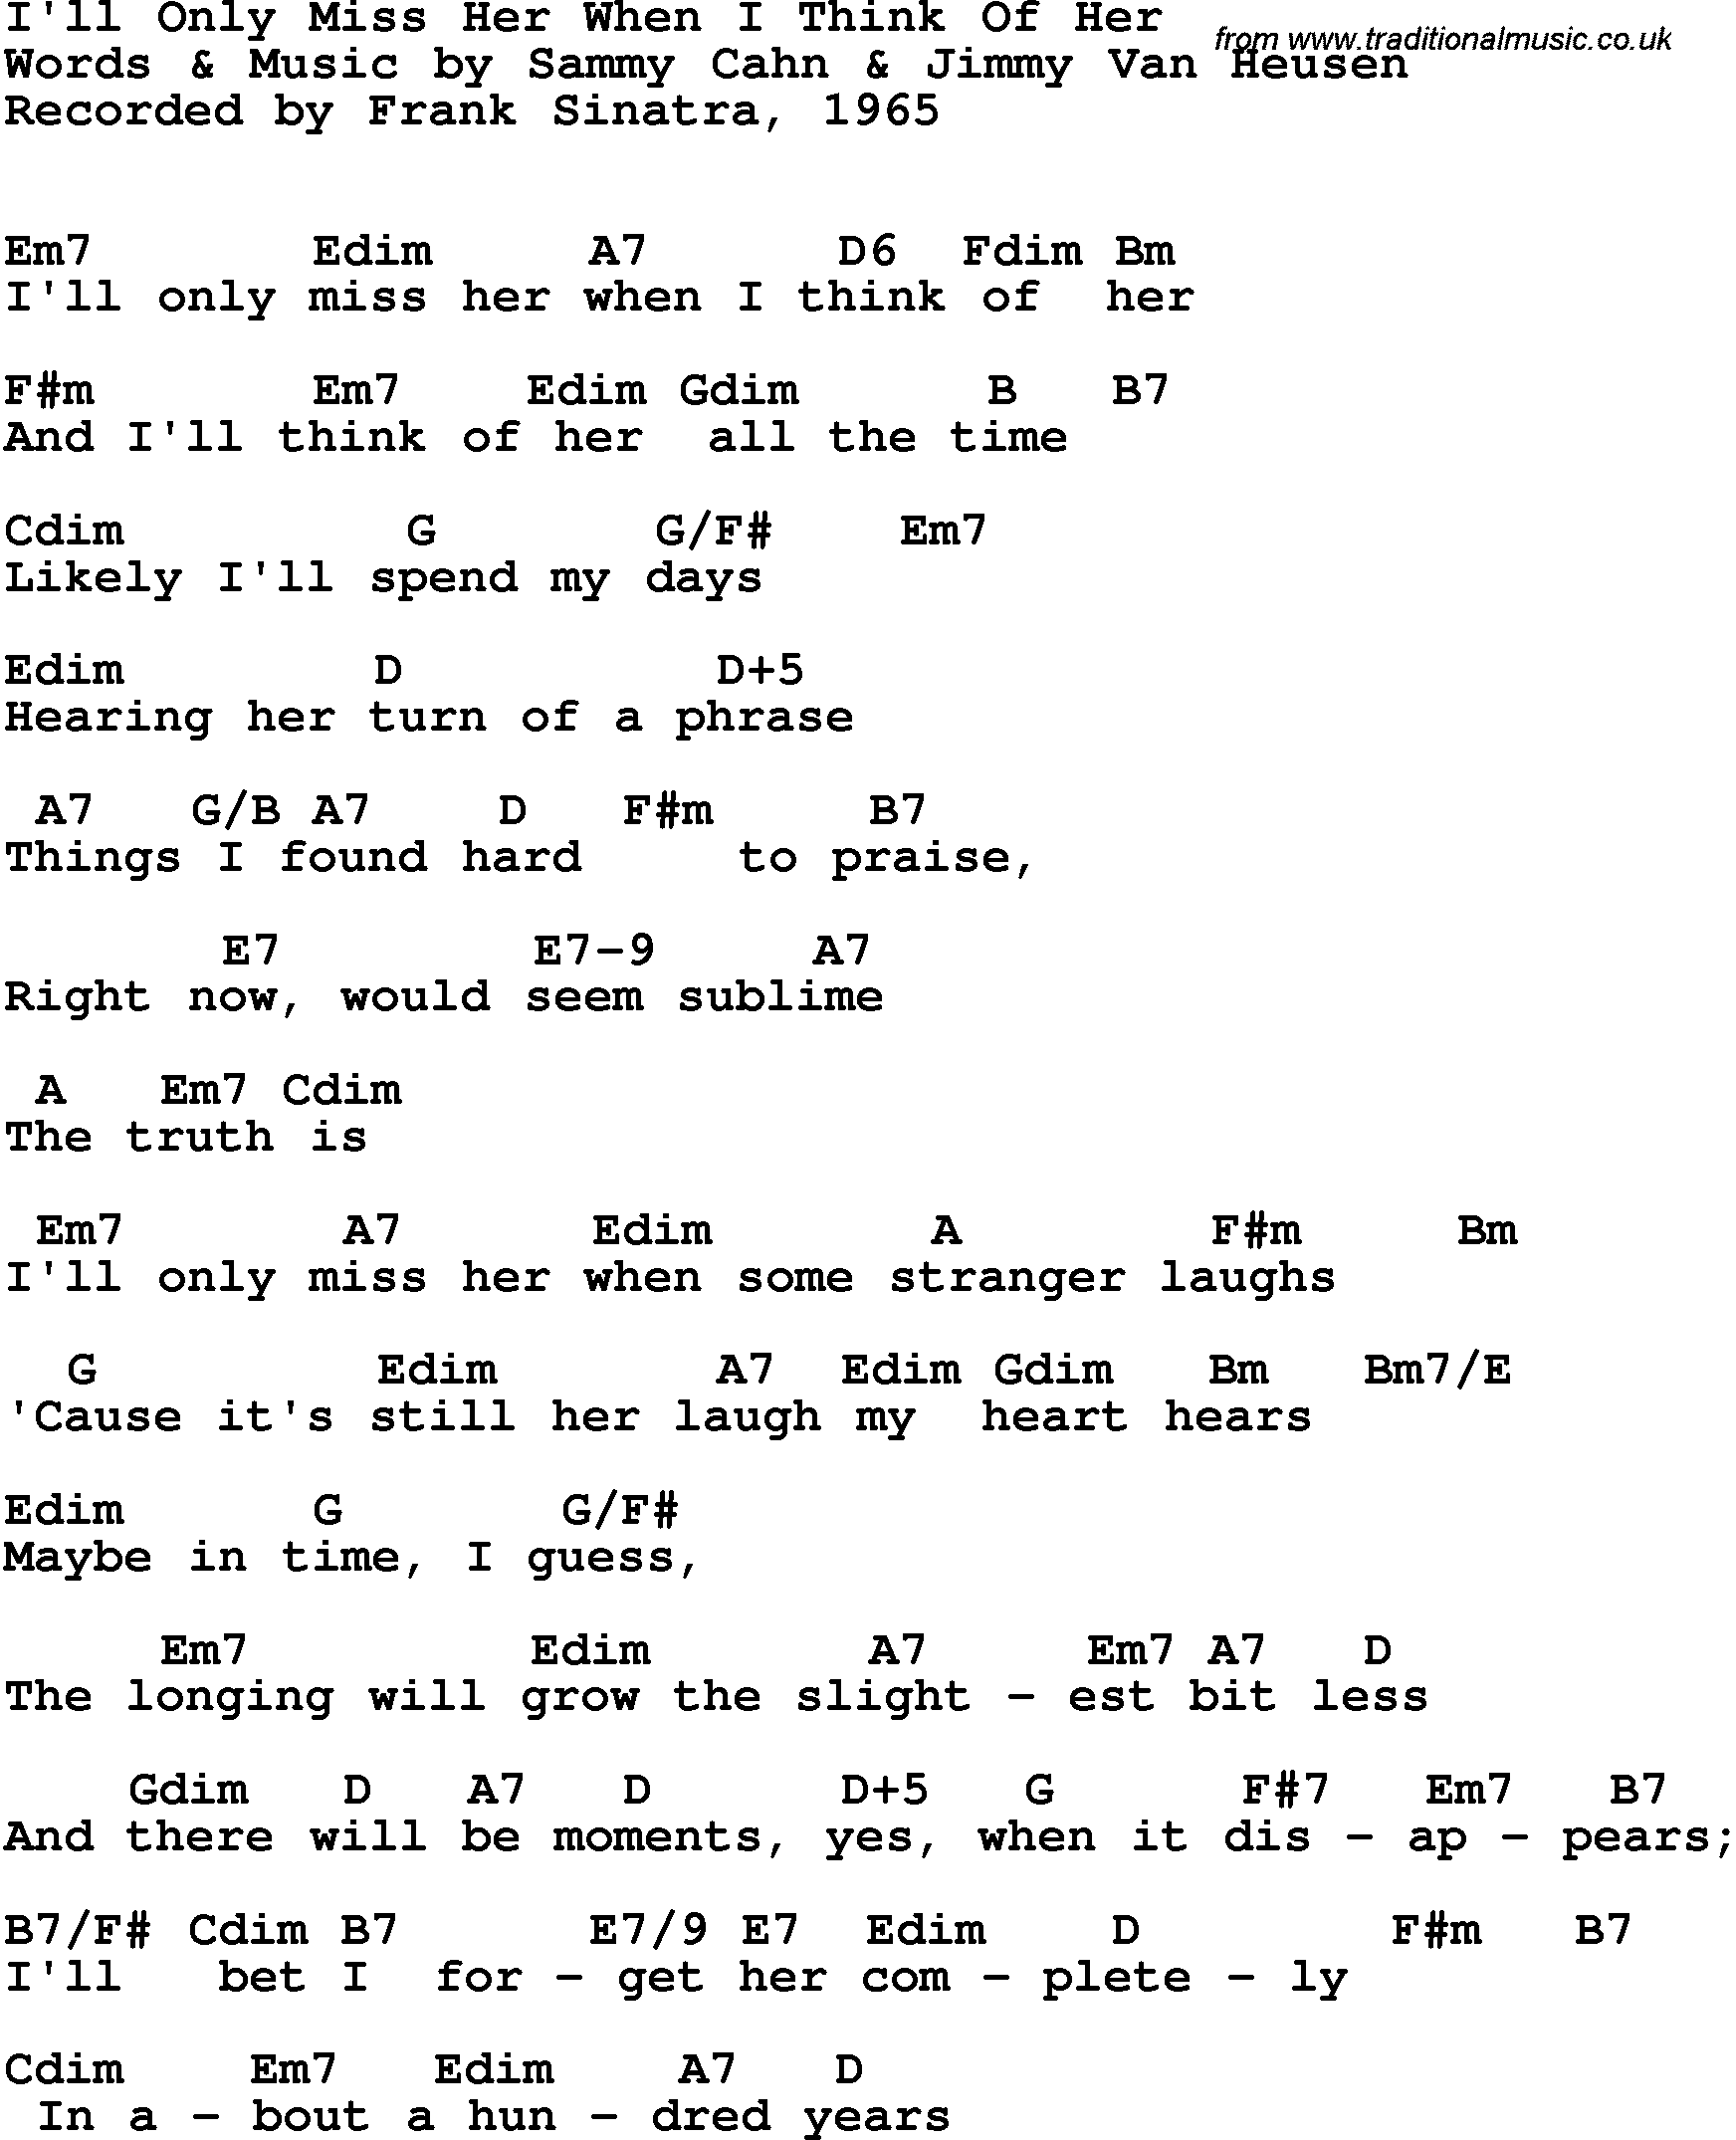 Song Lyrics with guitar chords for I'll Only Miss Her When I Think Of Her - Frank Sinatra,  1965